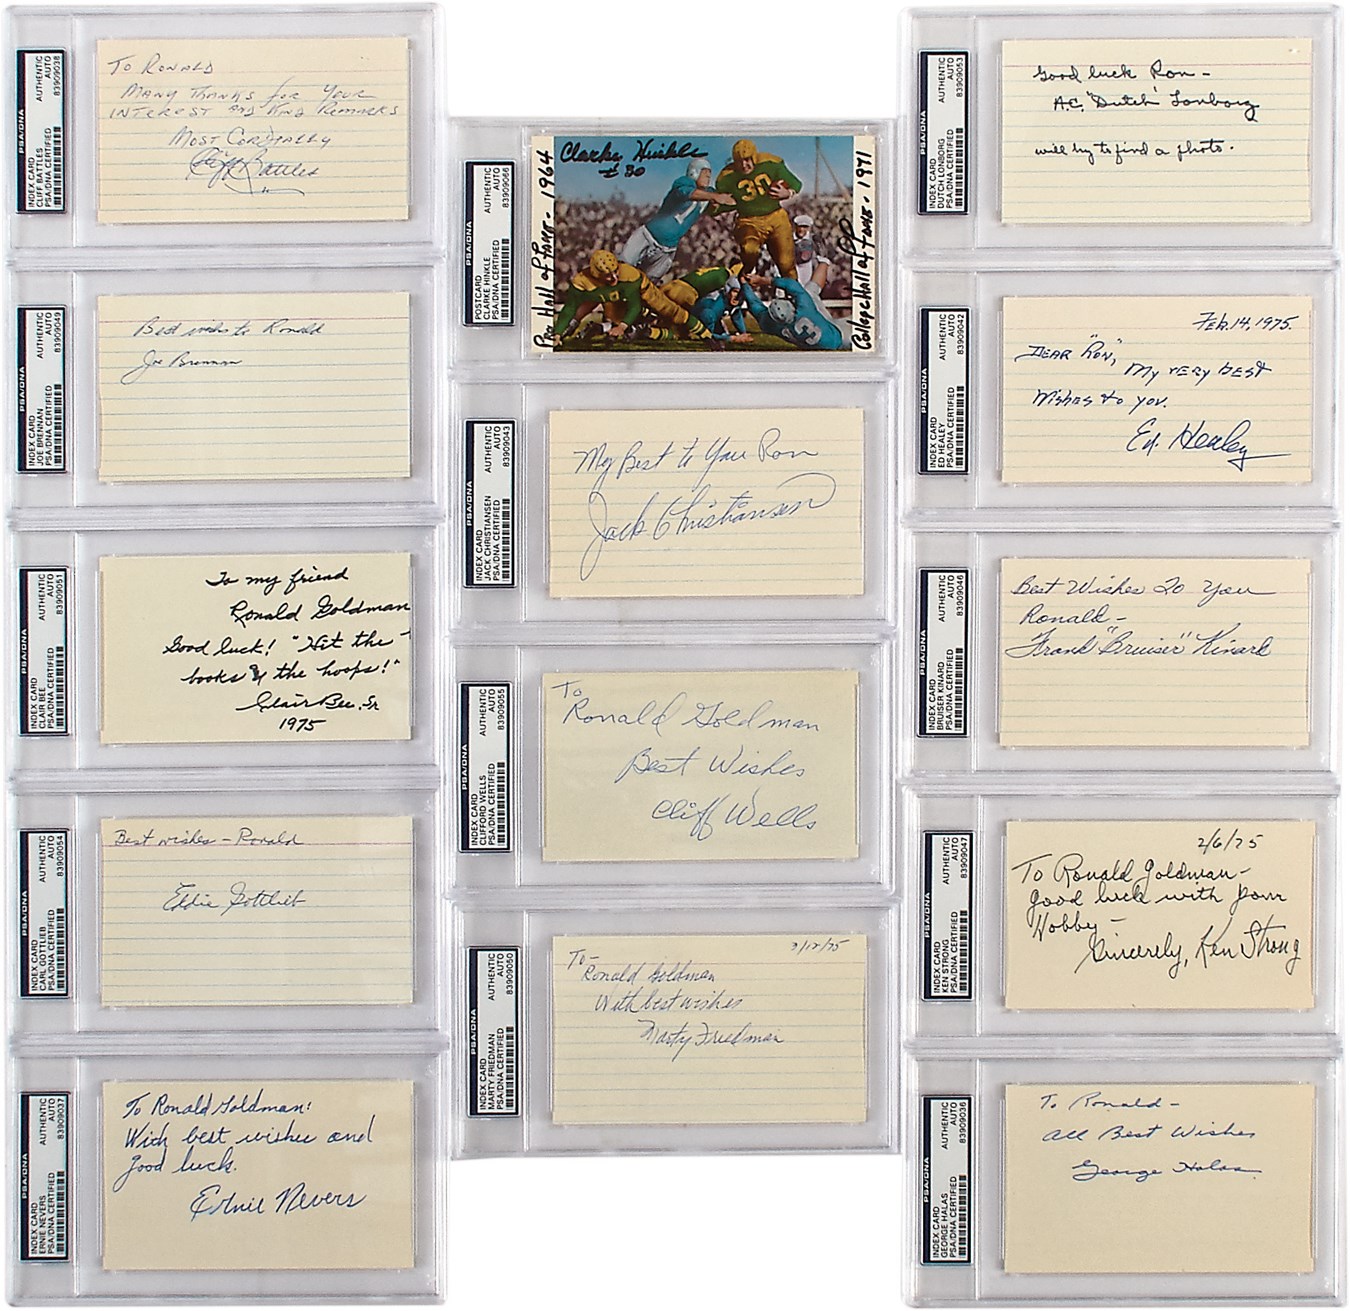 - Vintage Football & Basketball Autographed Index Cards with Ken Strong (PSA/DNA)